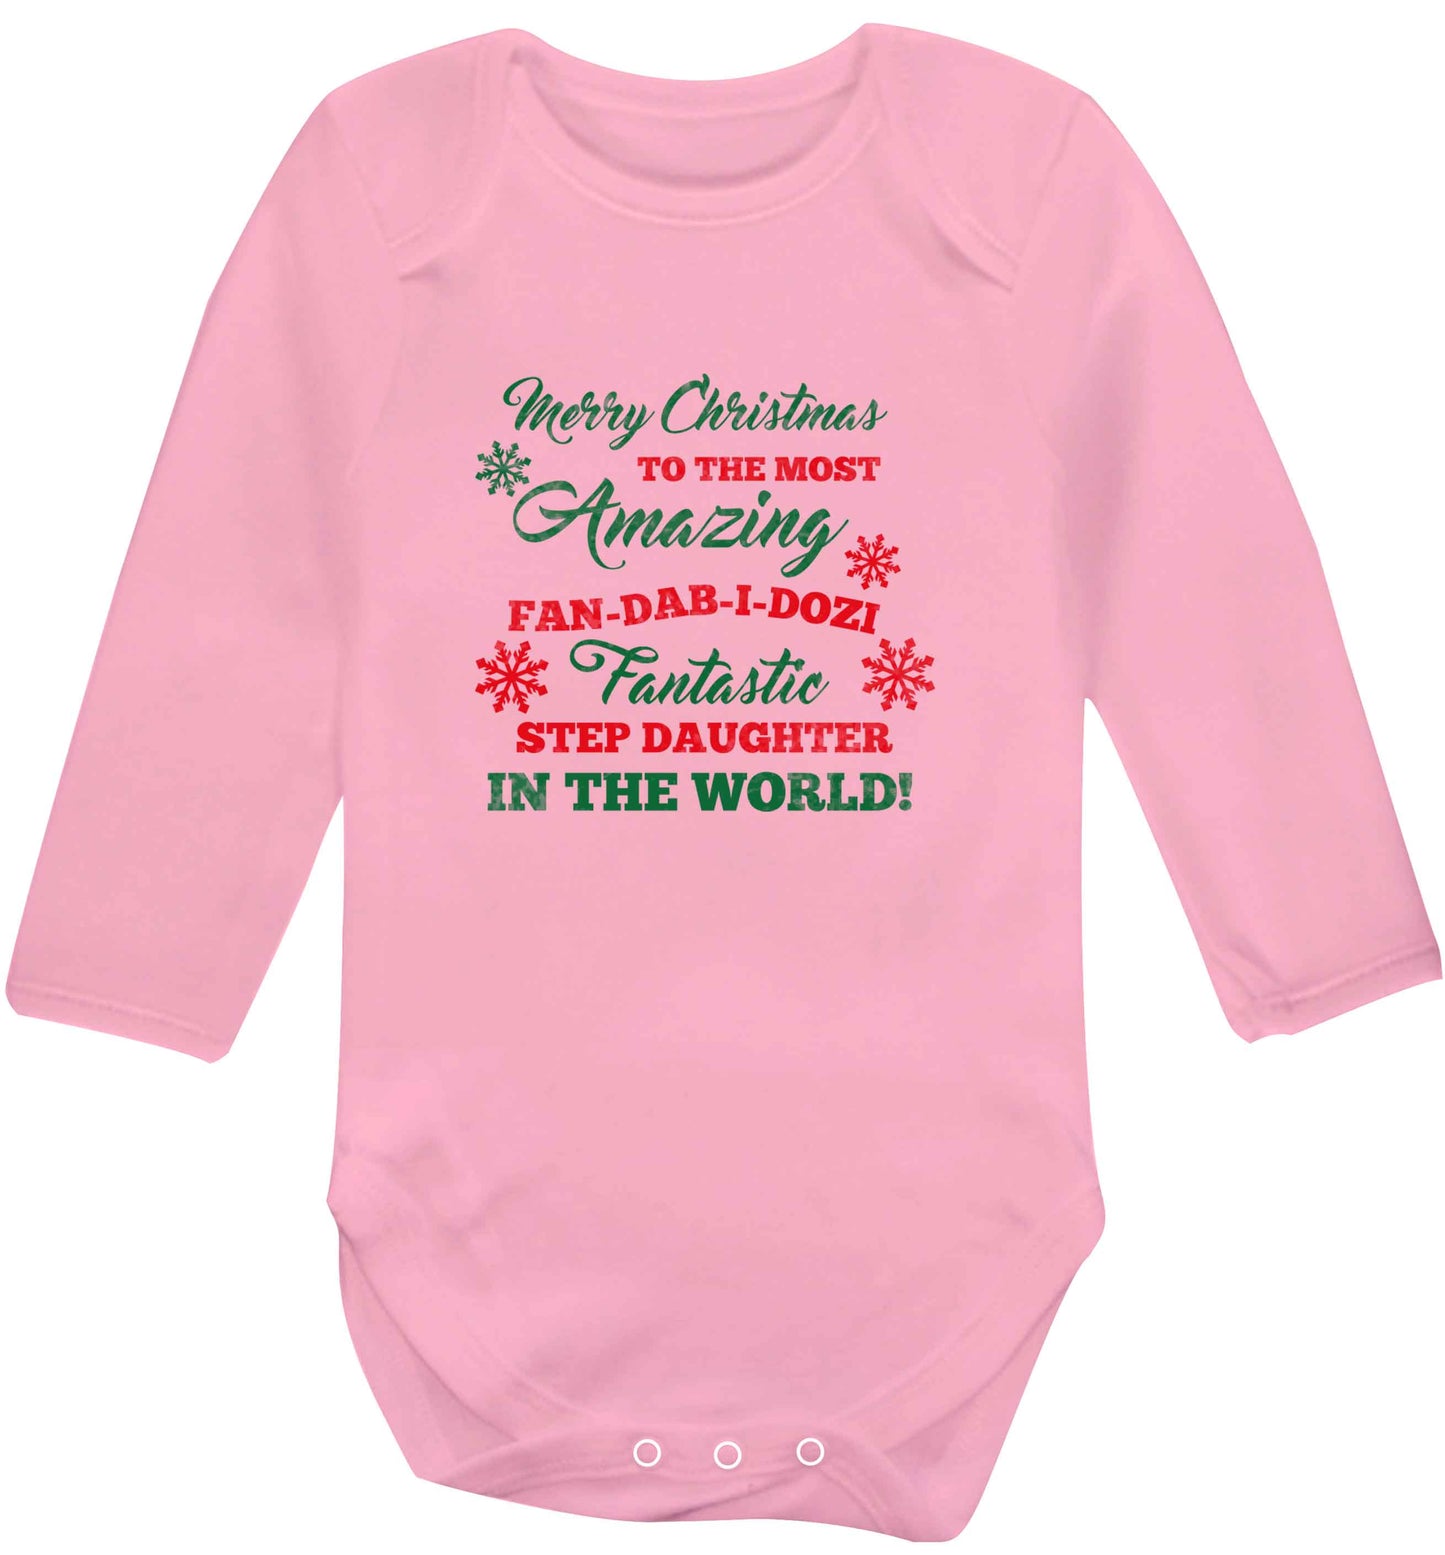 Merry Christmas to the most amazing fan-dab-i-dozi fantasic Step Daughter in the world baby vest long sleeved pale pink 6-12 months